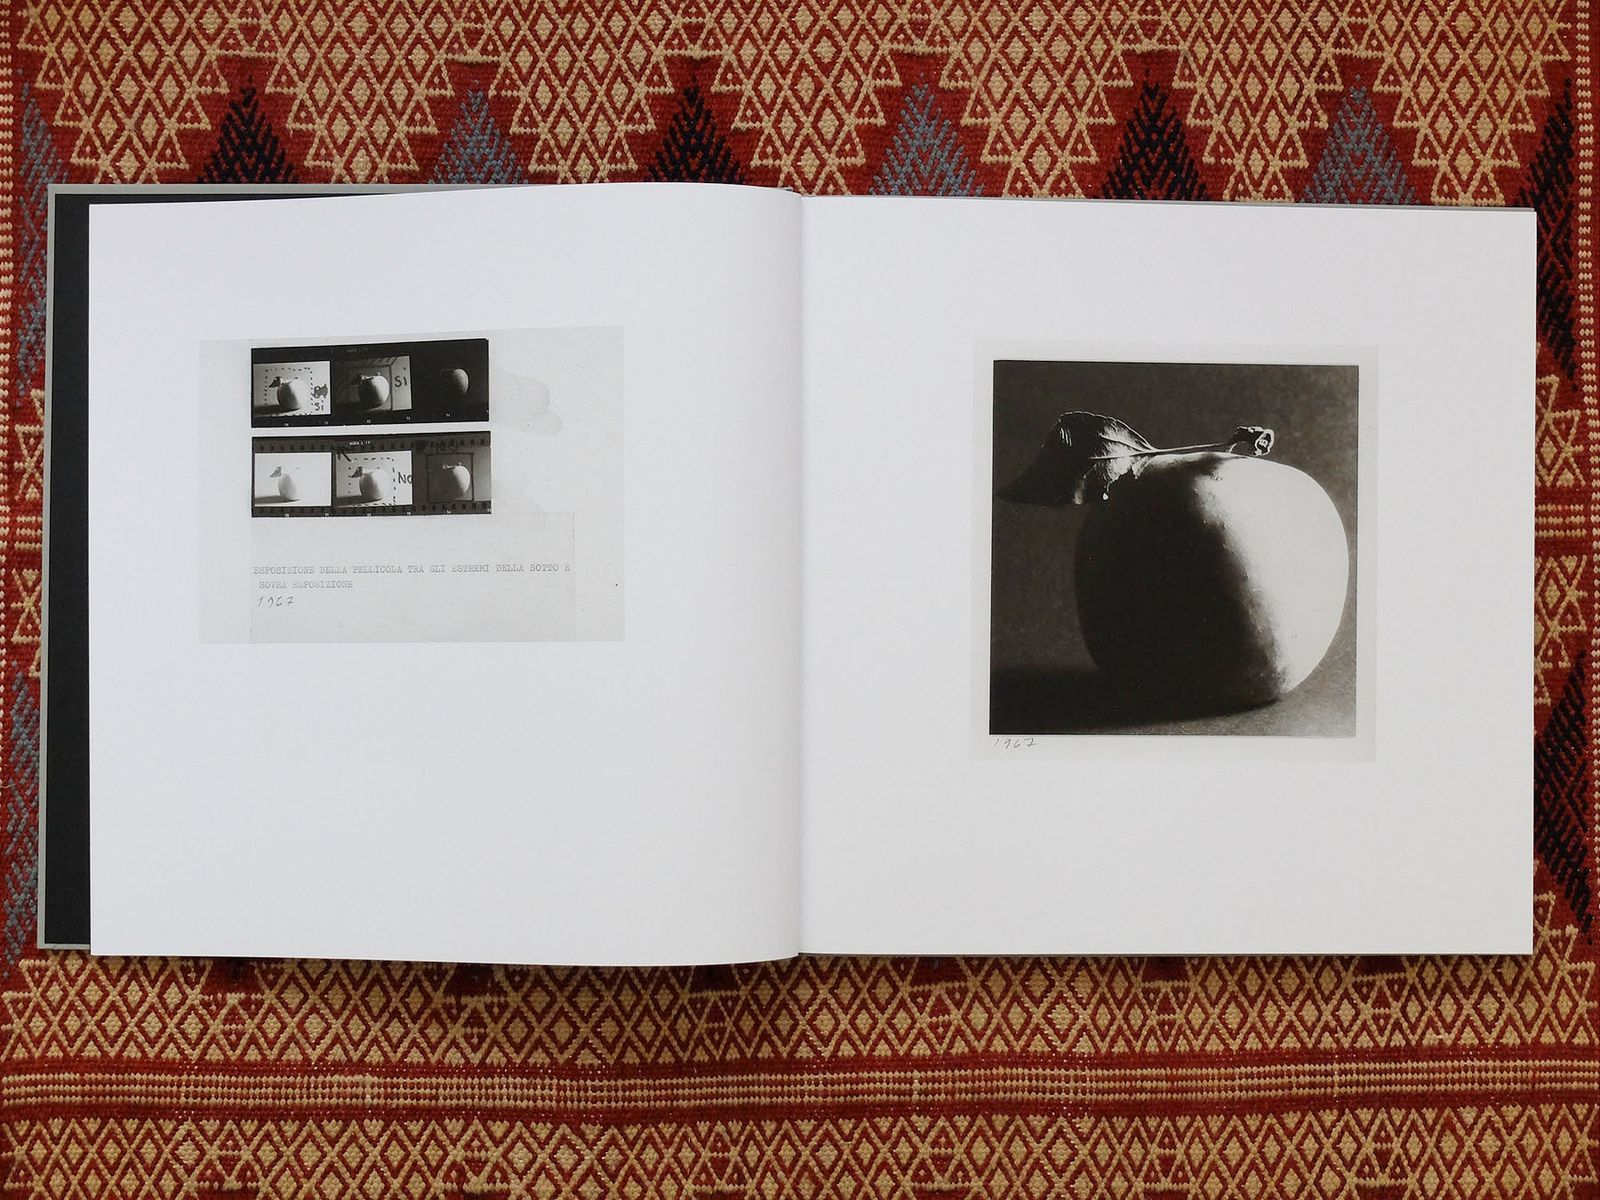 © Leporello Books - Image from the LUNARIO, 1968-1999 by Guido Guidi photography project